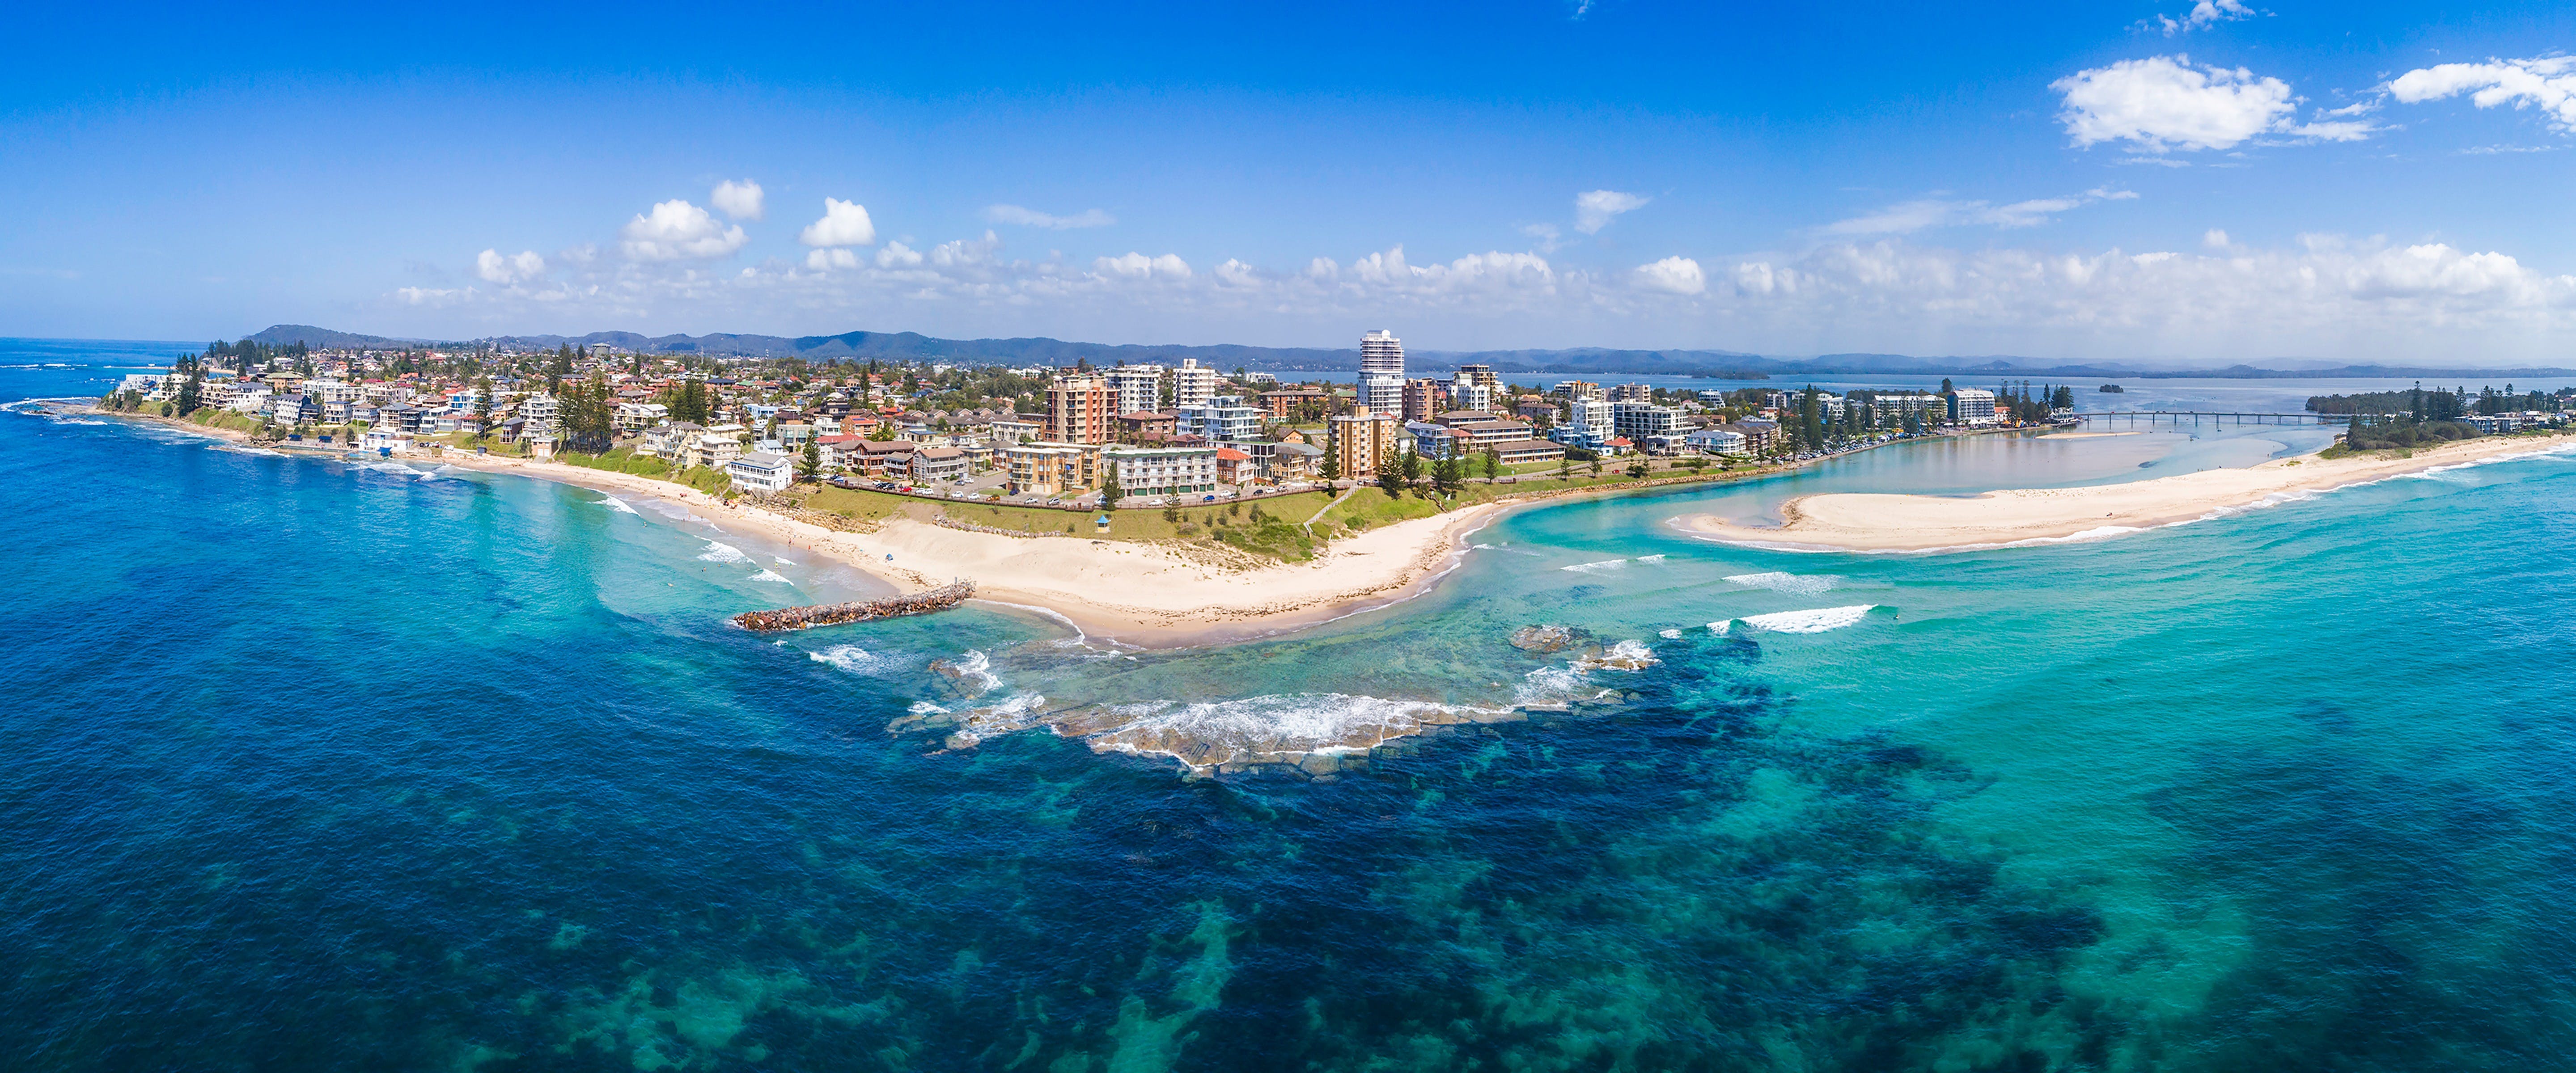 ibis Styles The Entrance - Coogee Beach Accommodation